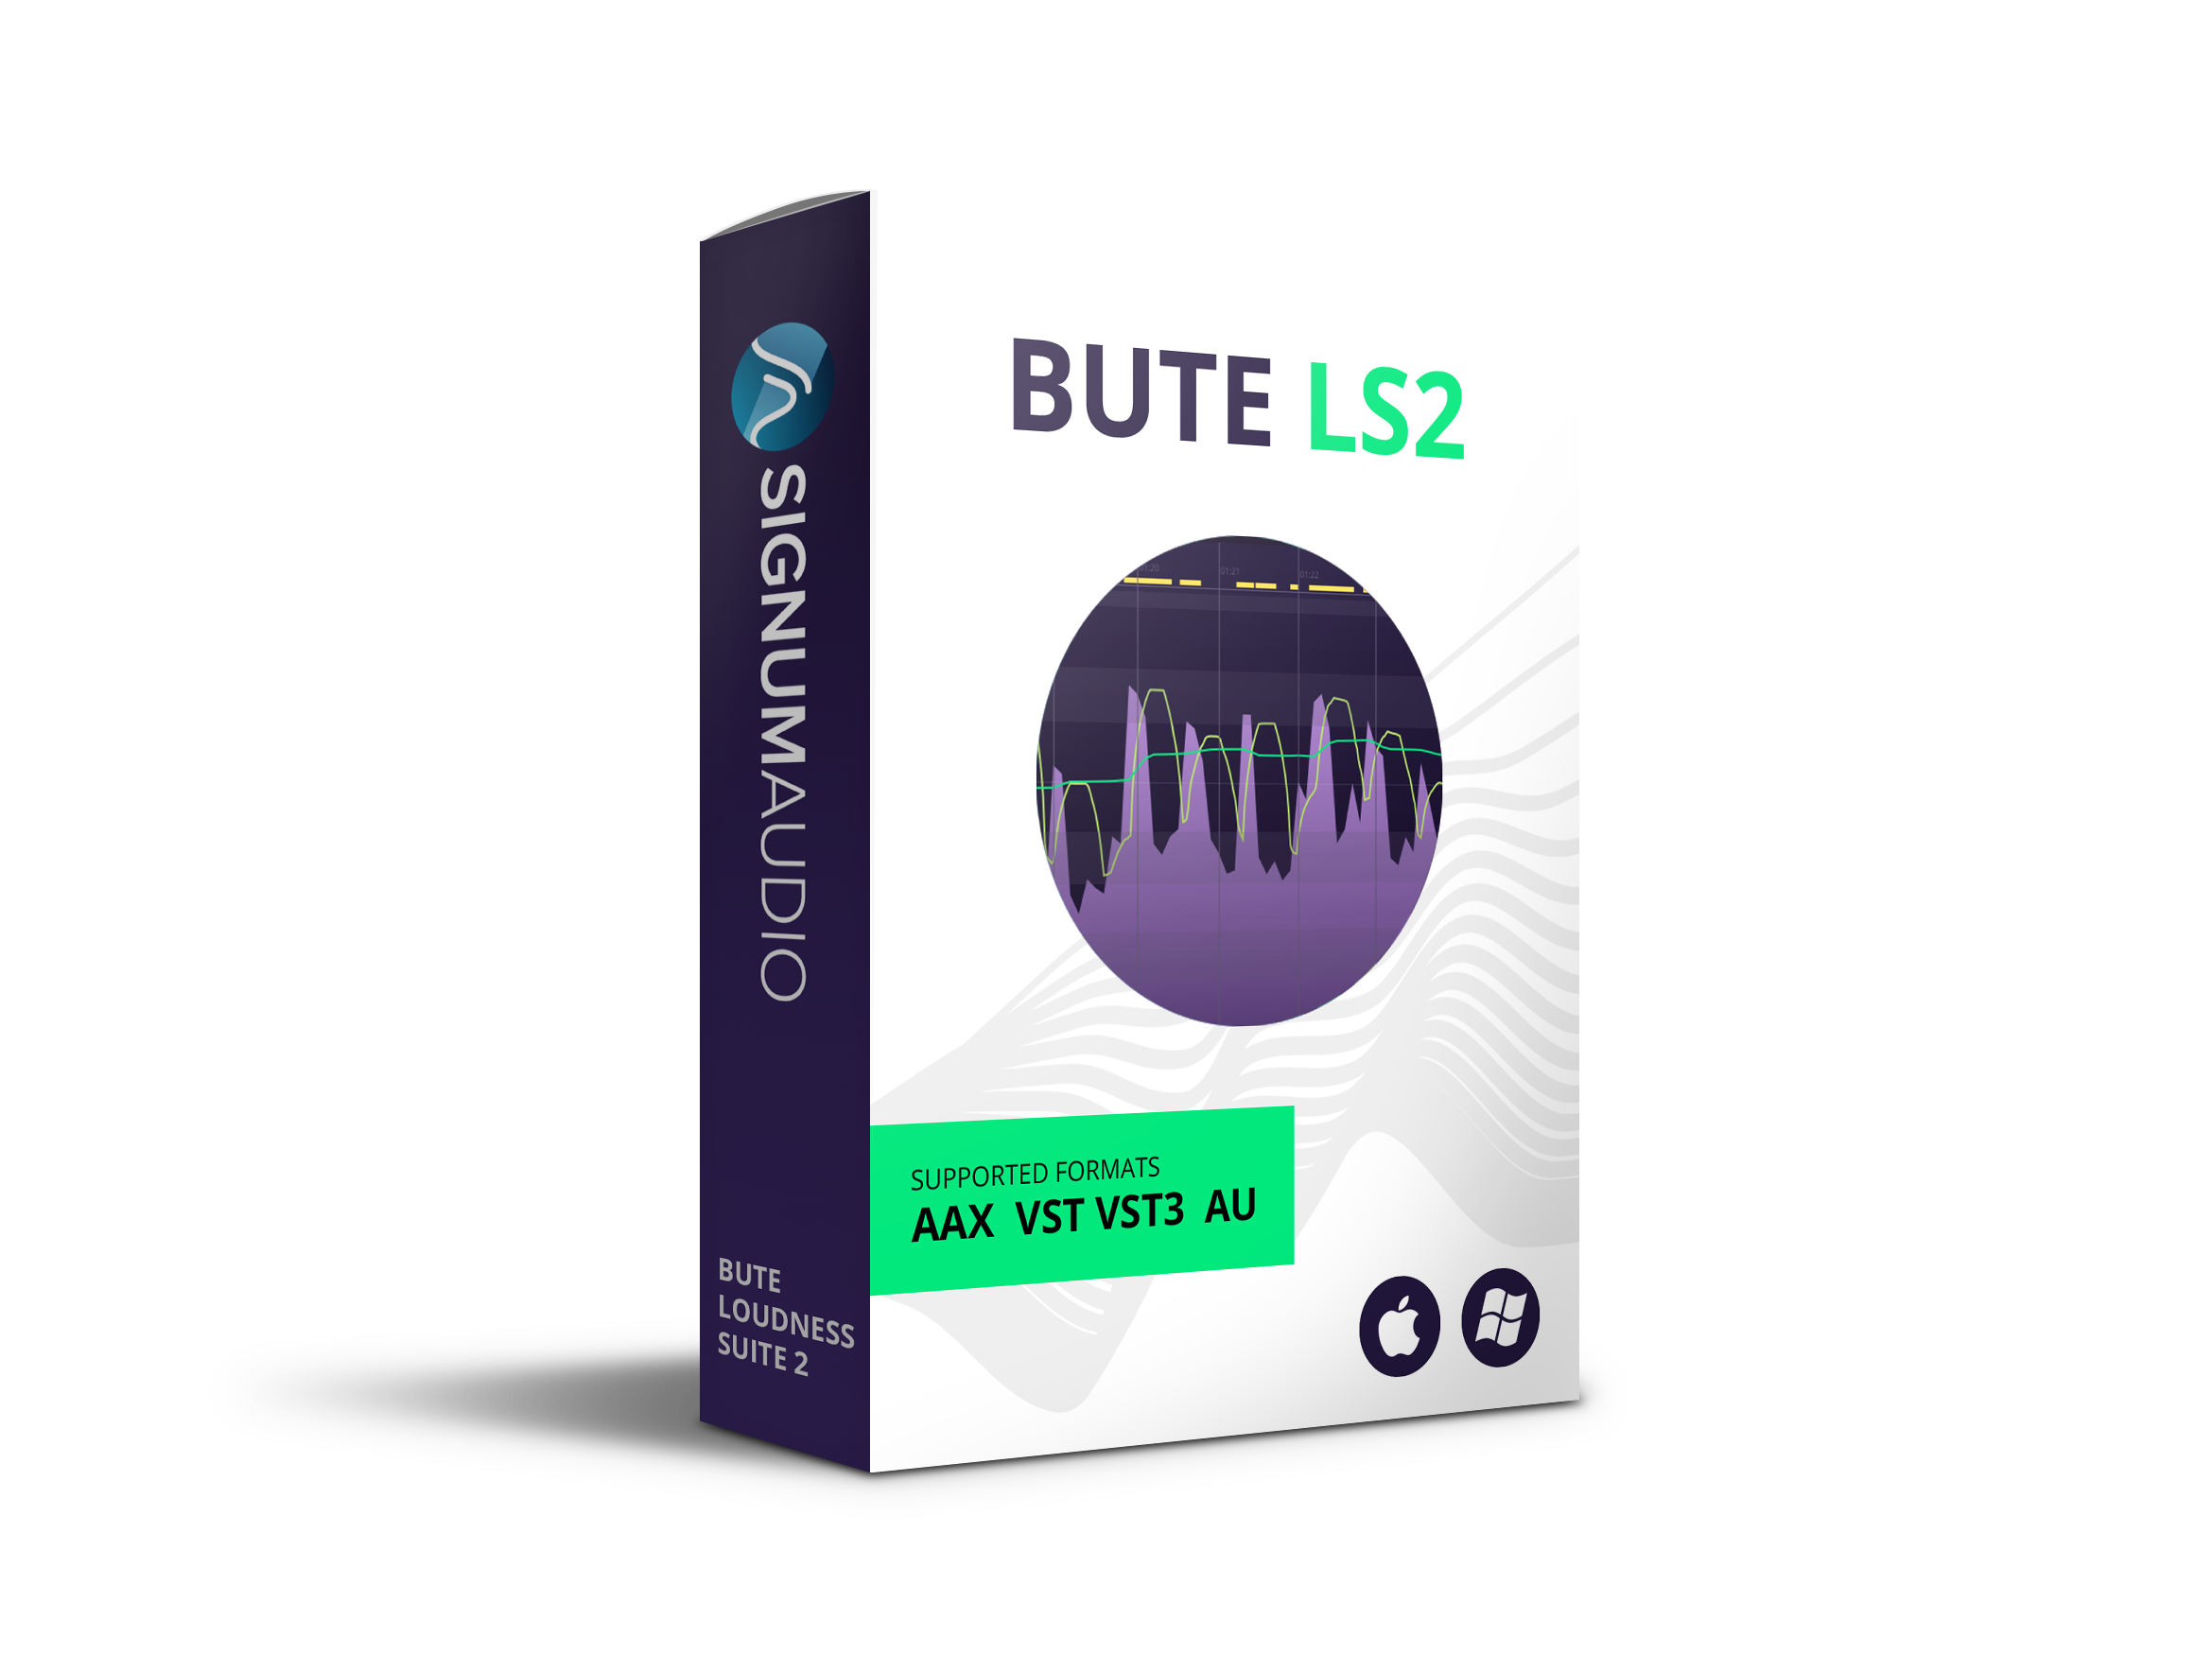 Signum Audio Bute Loudness Suite Stereo